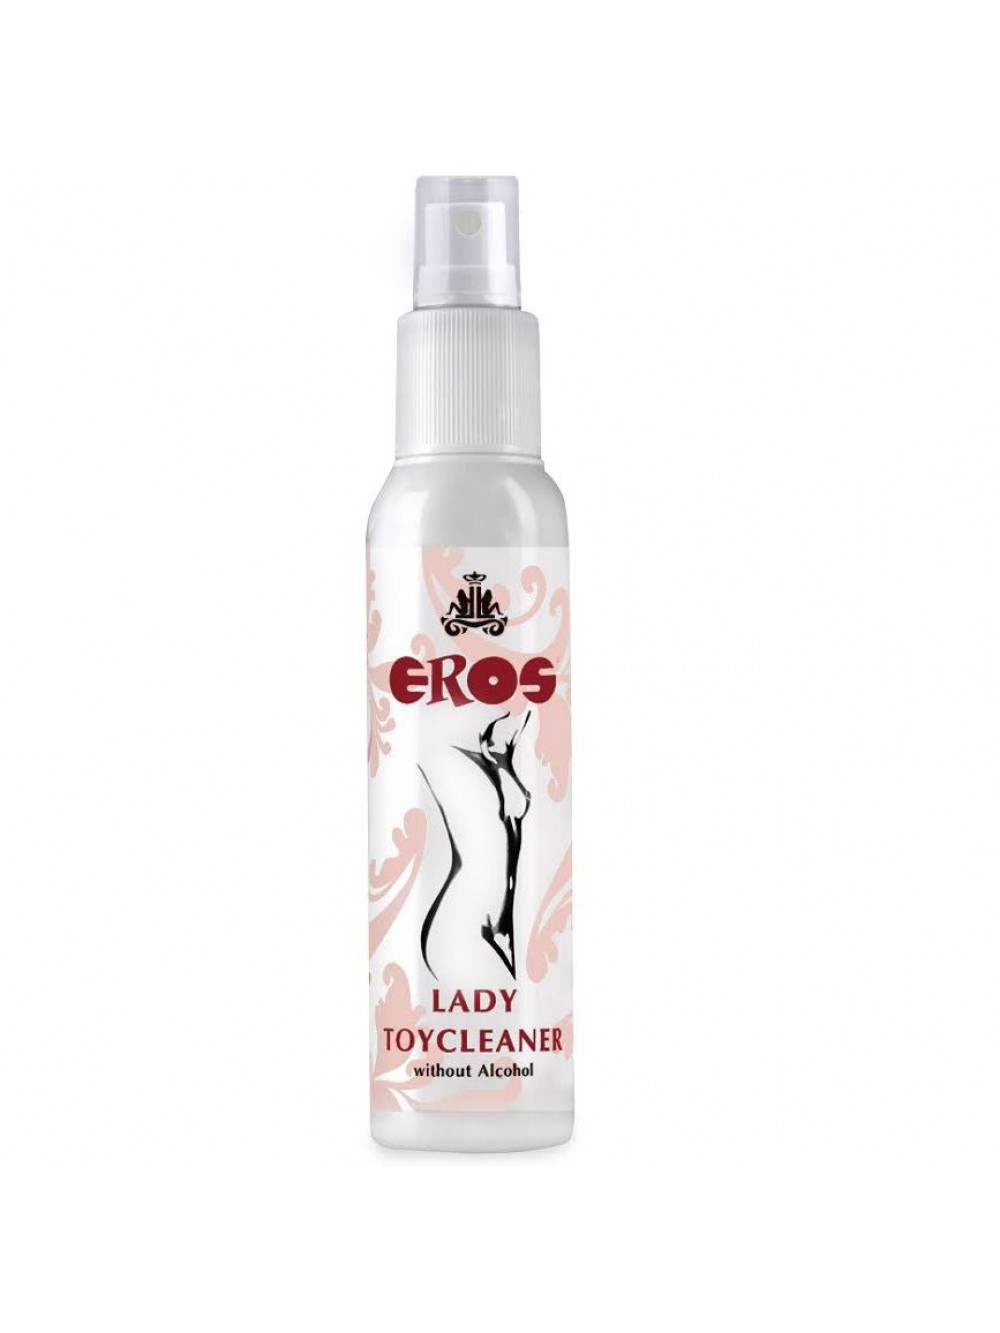 EROS LADY TOYCLEANER WITHOUT ALCOHOL